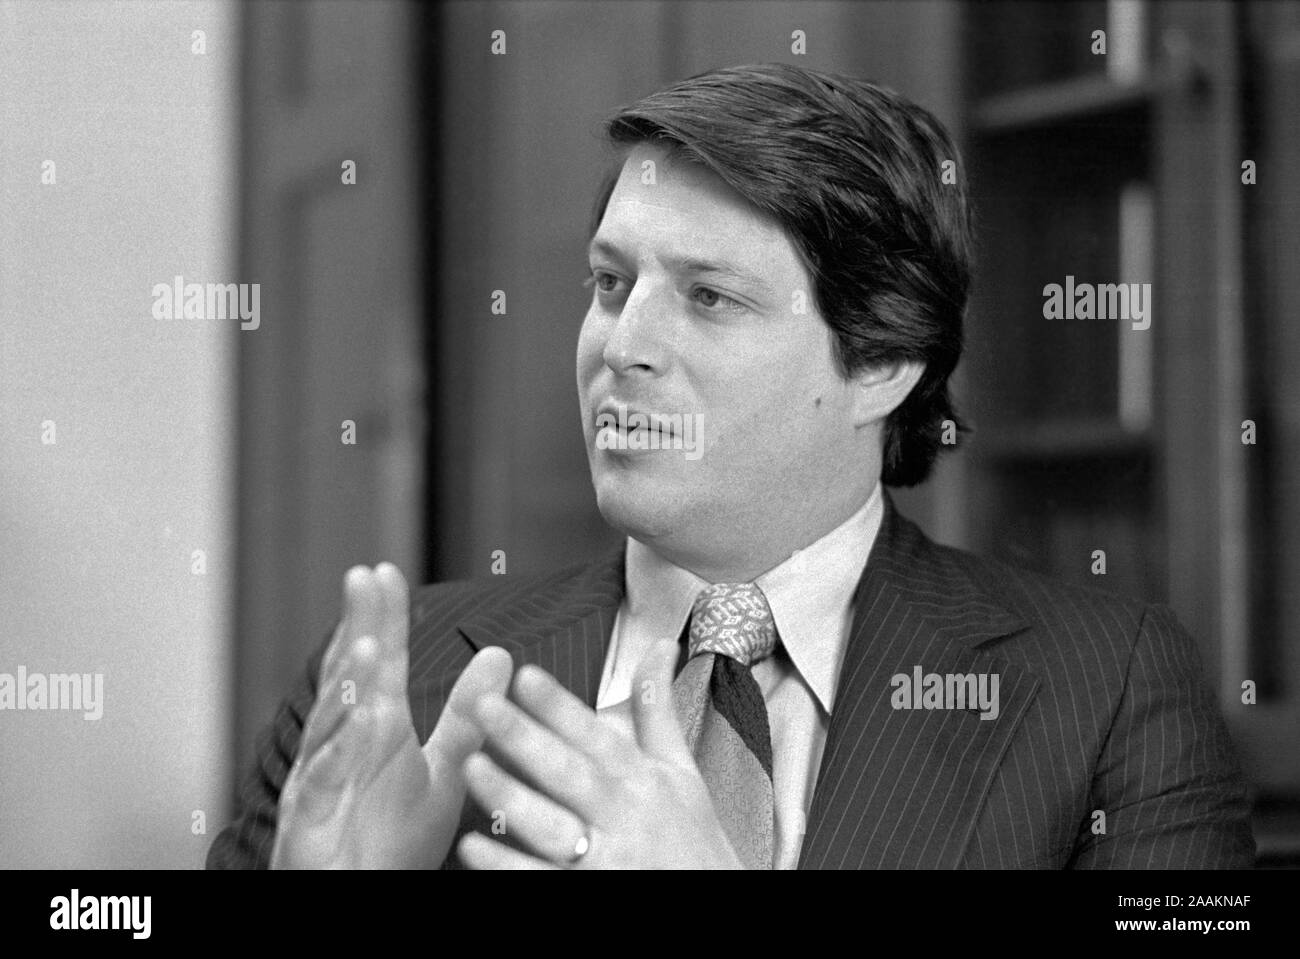 Interview with congressman Black and White Stock Photos & Images - Alamy